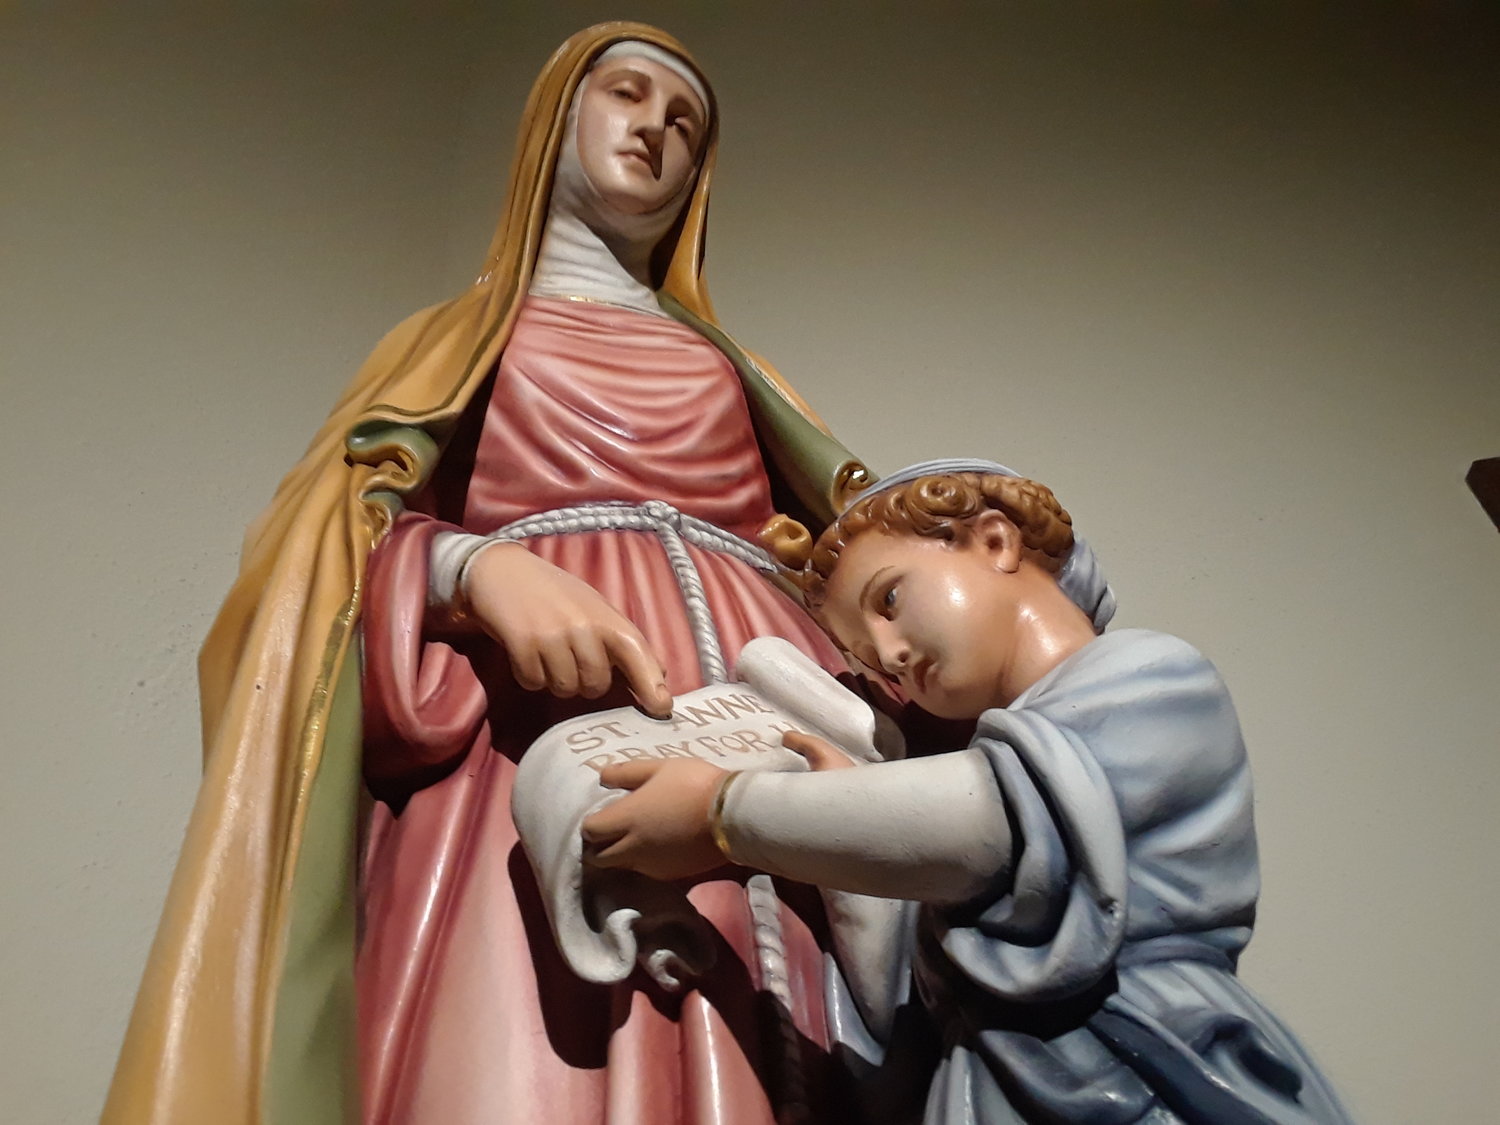 This statue of St. Ann and her grandson, the child Jesus, adorns Immaculate Conception Church in Jefferson City.